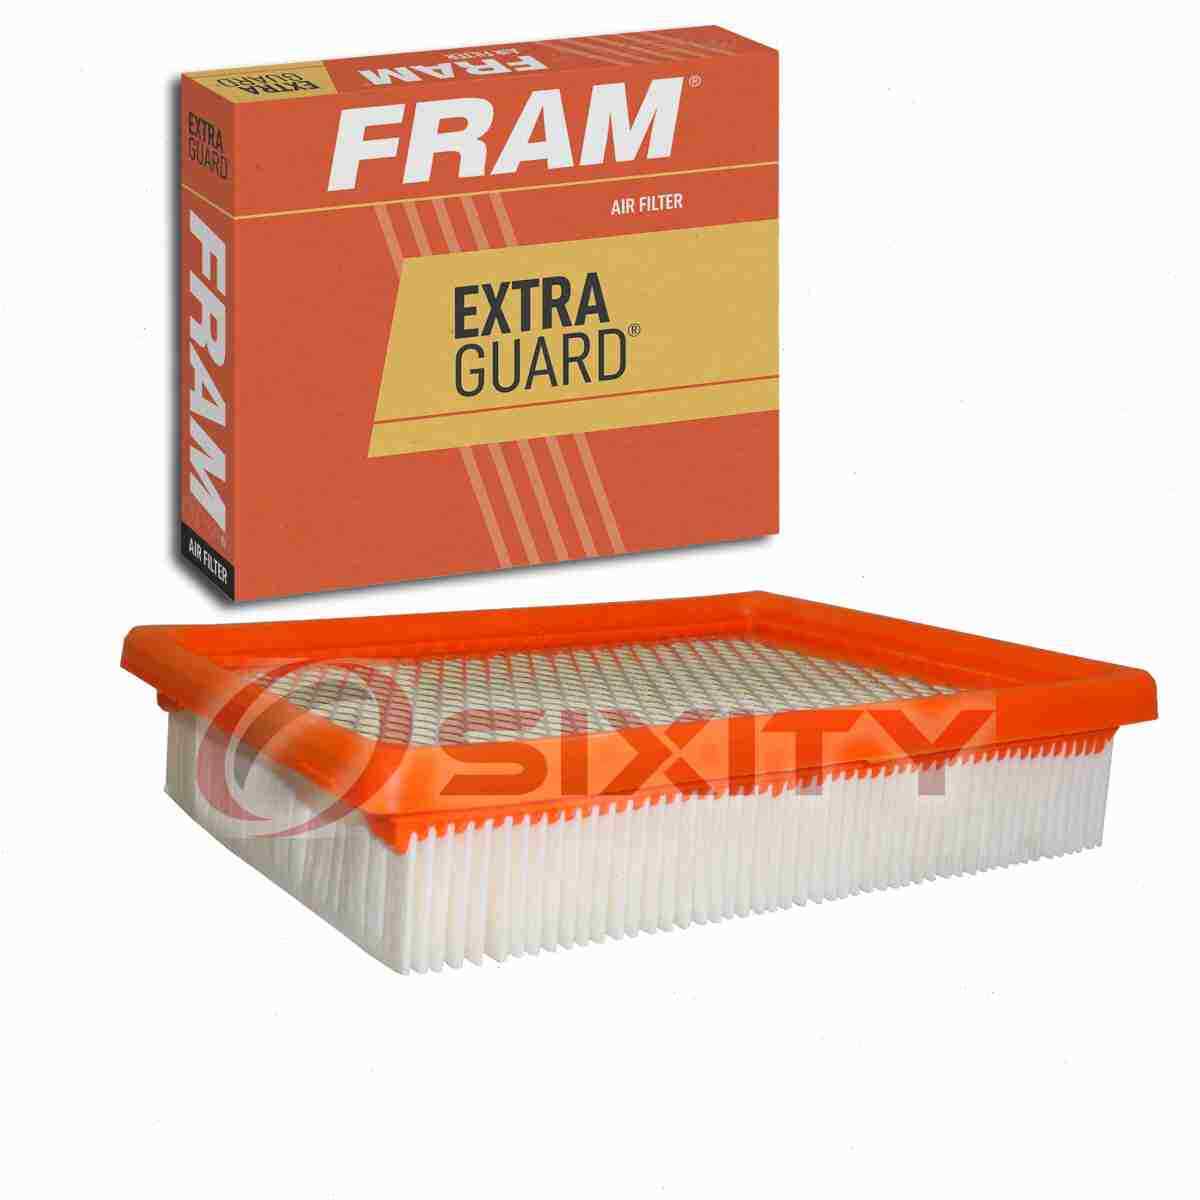 FRAM Extra Guard Air Filter for 1992-1993 Chevrolet Corsica Intake Inlet xi